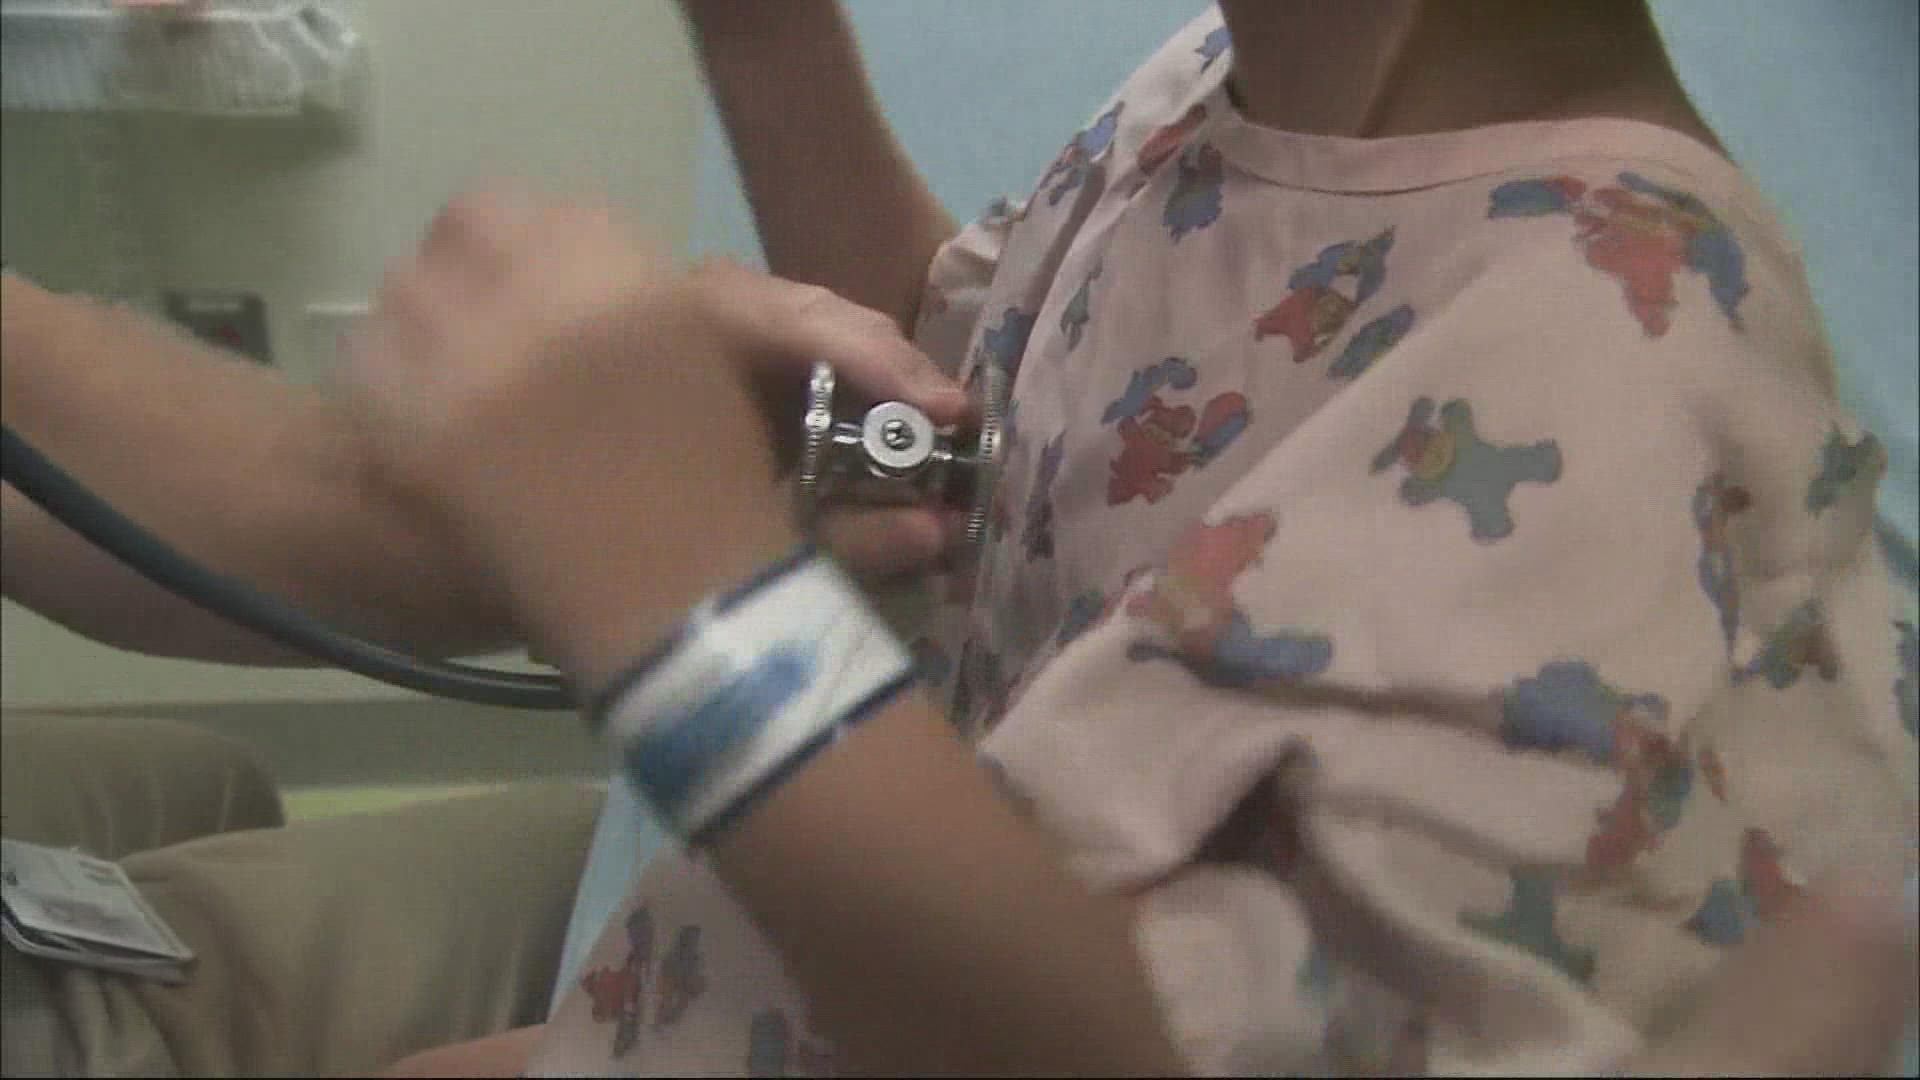 Multiple pediatric hospitals in Portland have moved into crisis care standards due to an overload of young children with severe RSV infections.